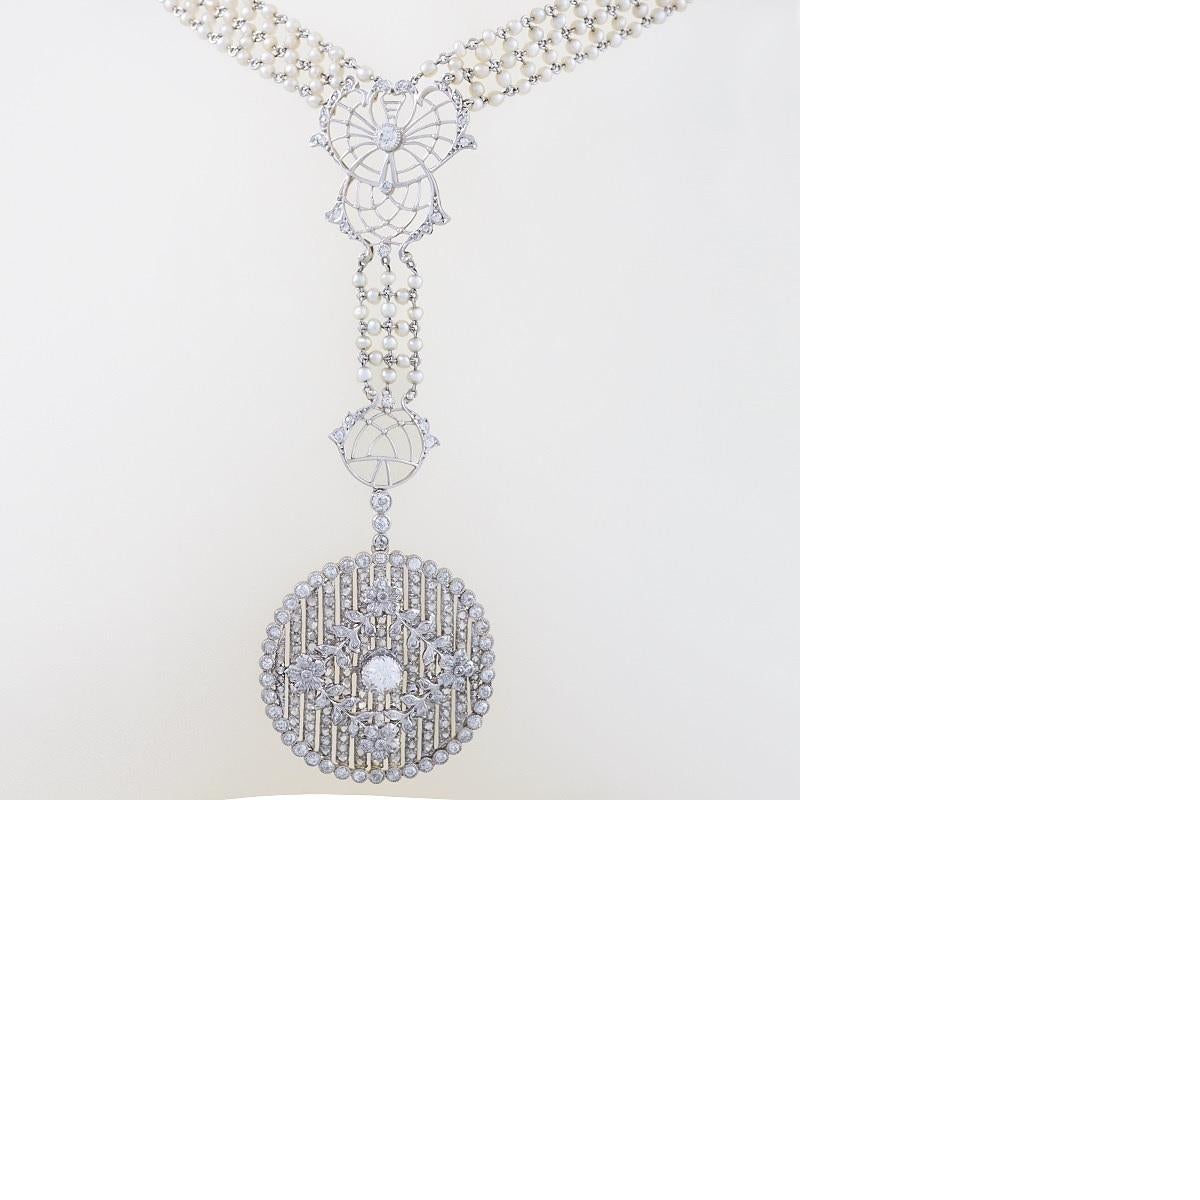 An Edwardian platinum sautoir necklace with diamonds and seed pearls. The necklace is comprised of a chain with five rows of seed pearls, interspersed with complex decorative filigree work and studded with diamonds. It has a hanging pendant